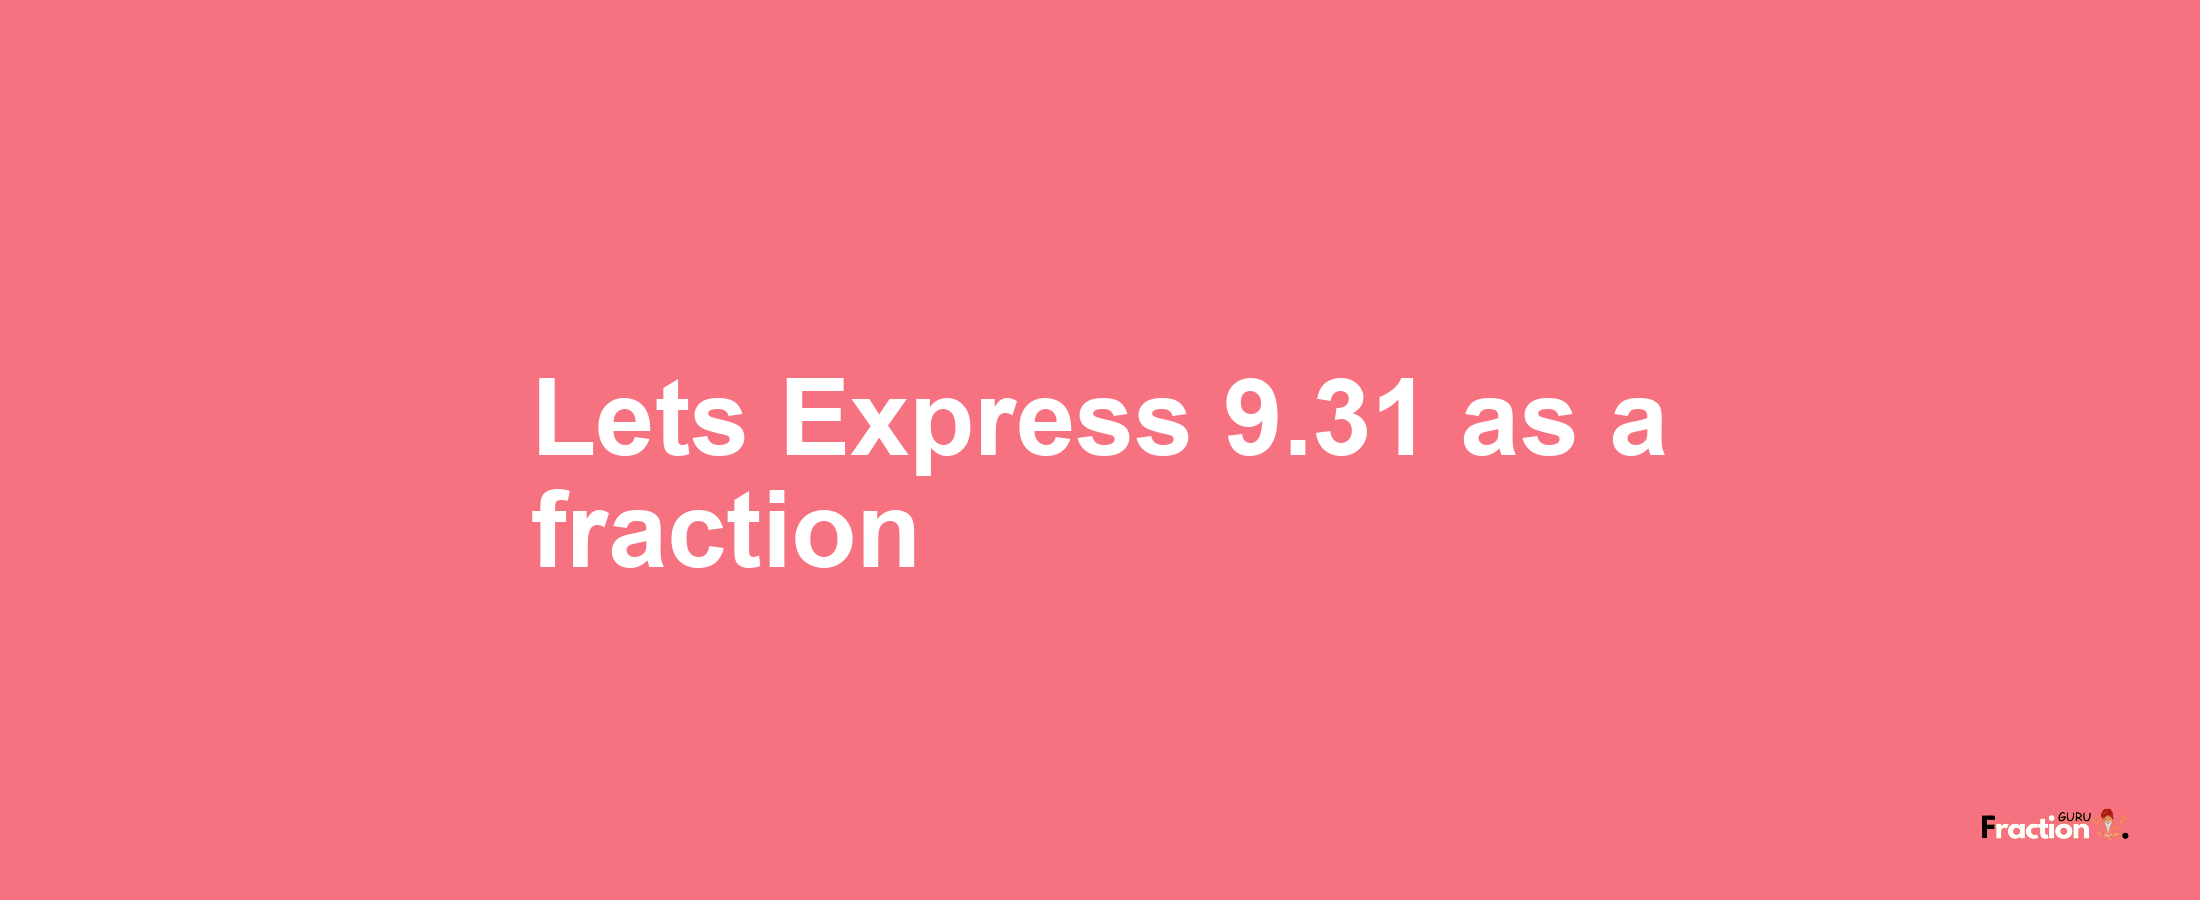 Lets Express 9.31 as afraction